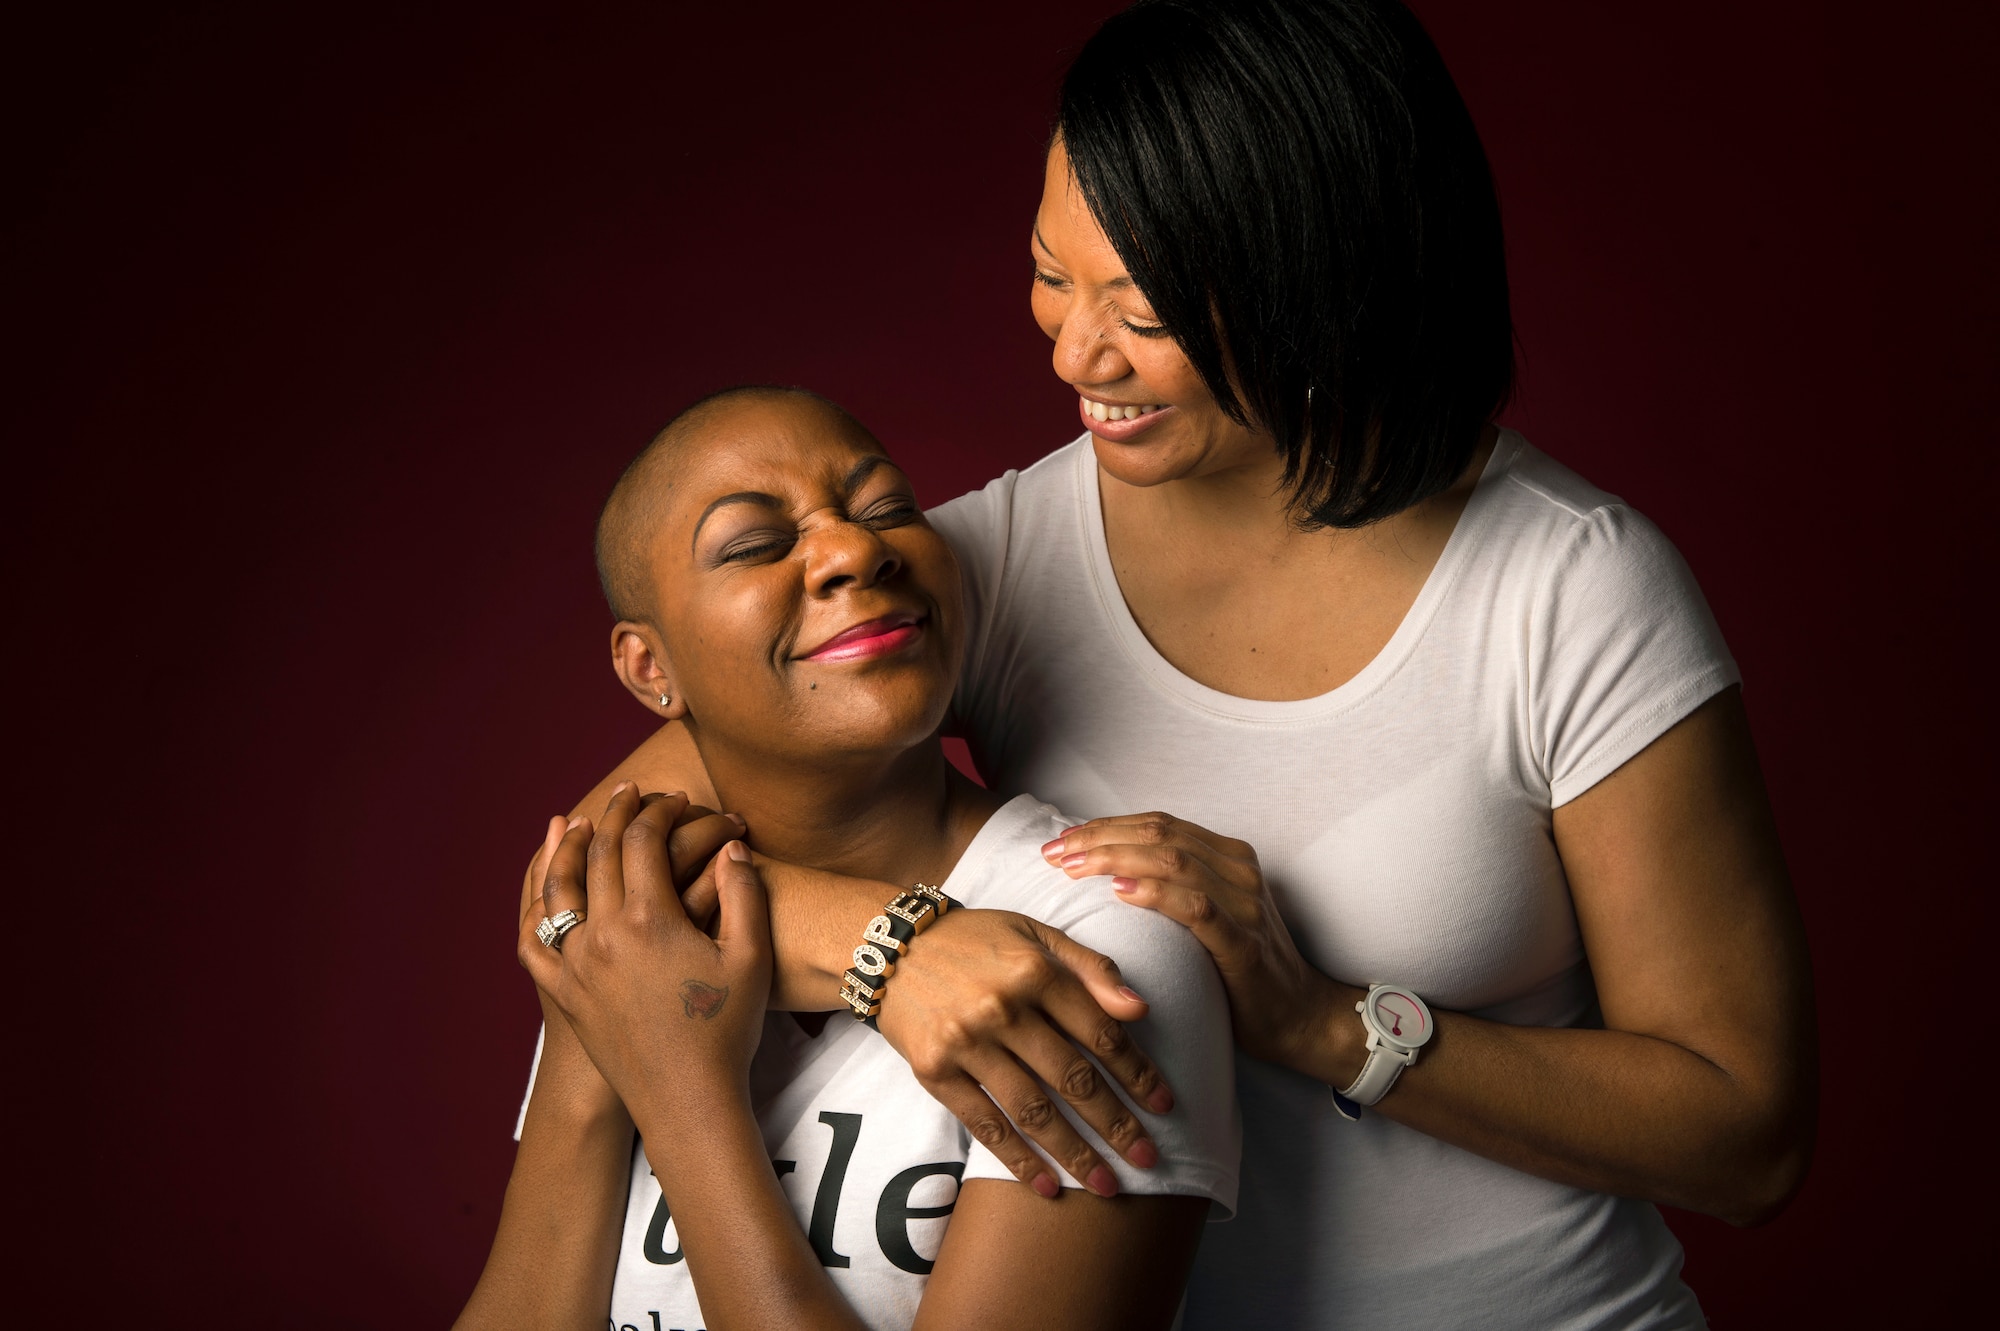 Staff Sgt. Chantel Thibeaux, Joint Base-Fort Sam Houston, Texas, dental assistant instructor, smiles as her mother Carla gives her a hug. Thibeaux, 27, the youngest breast cancer patient at San Antonio Medical Center, was diagnosed with breast cancer in February 2014. Her mother Carla scheduled administrative leave to be there for Thibeaux and her family during double mastectomy surgery. (U.S. Air Force photo/Staff Sgt. Vernon Young Jr.)